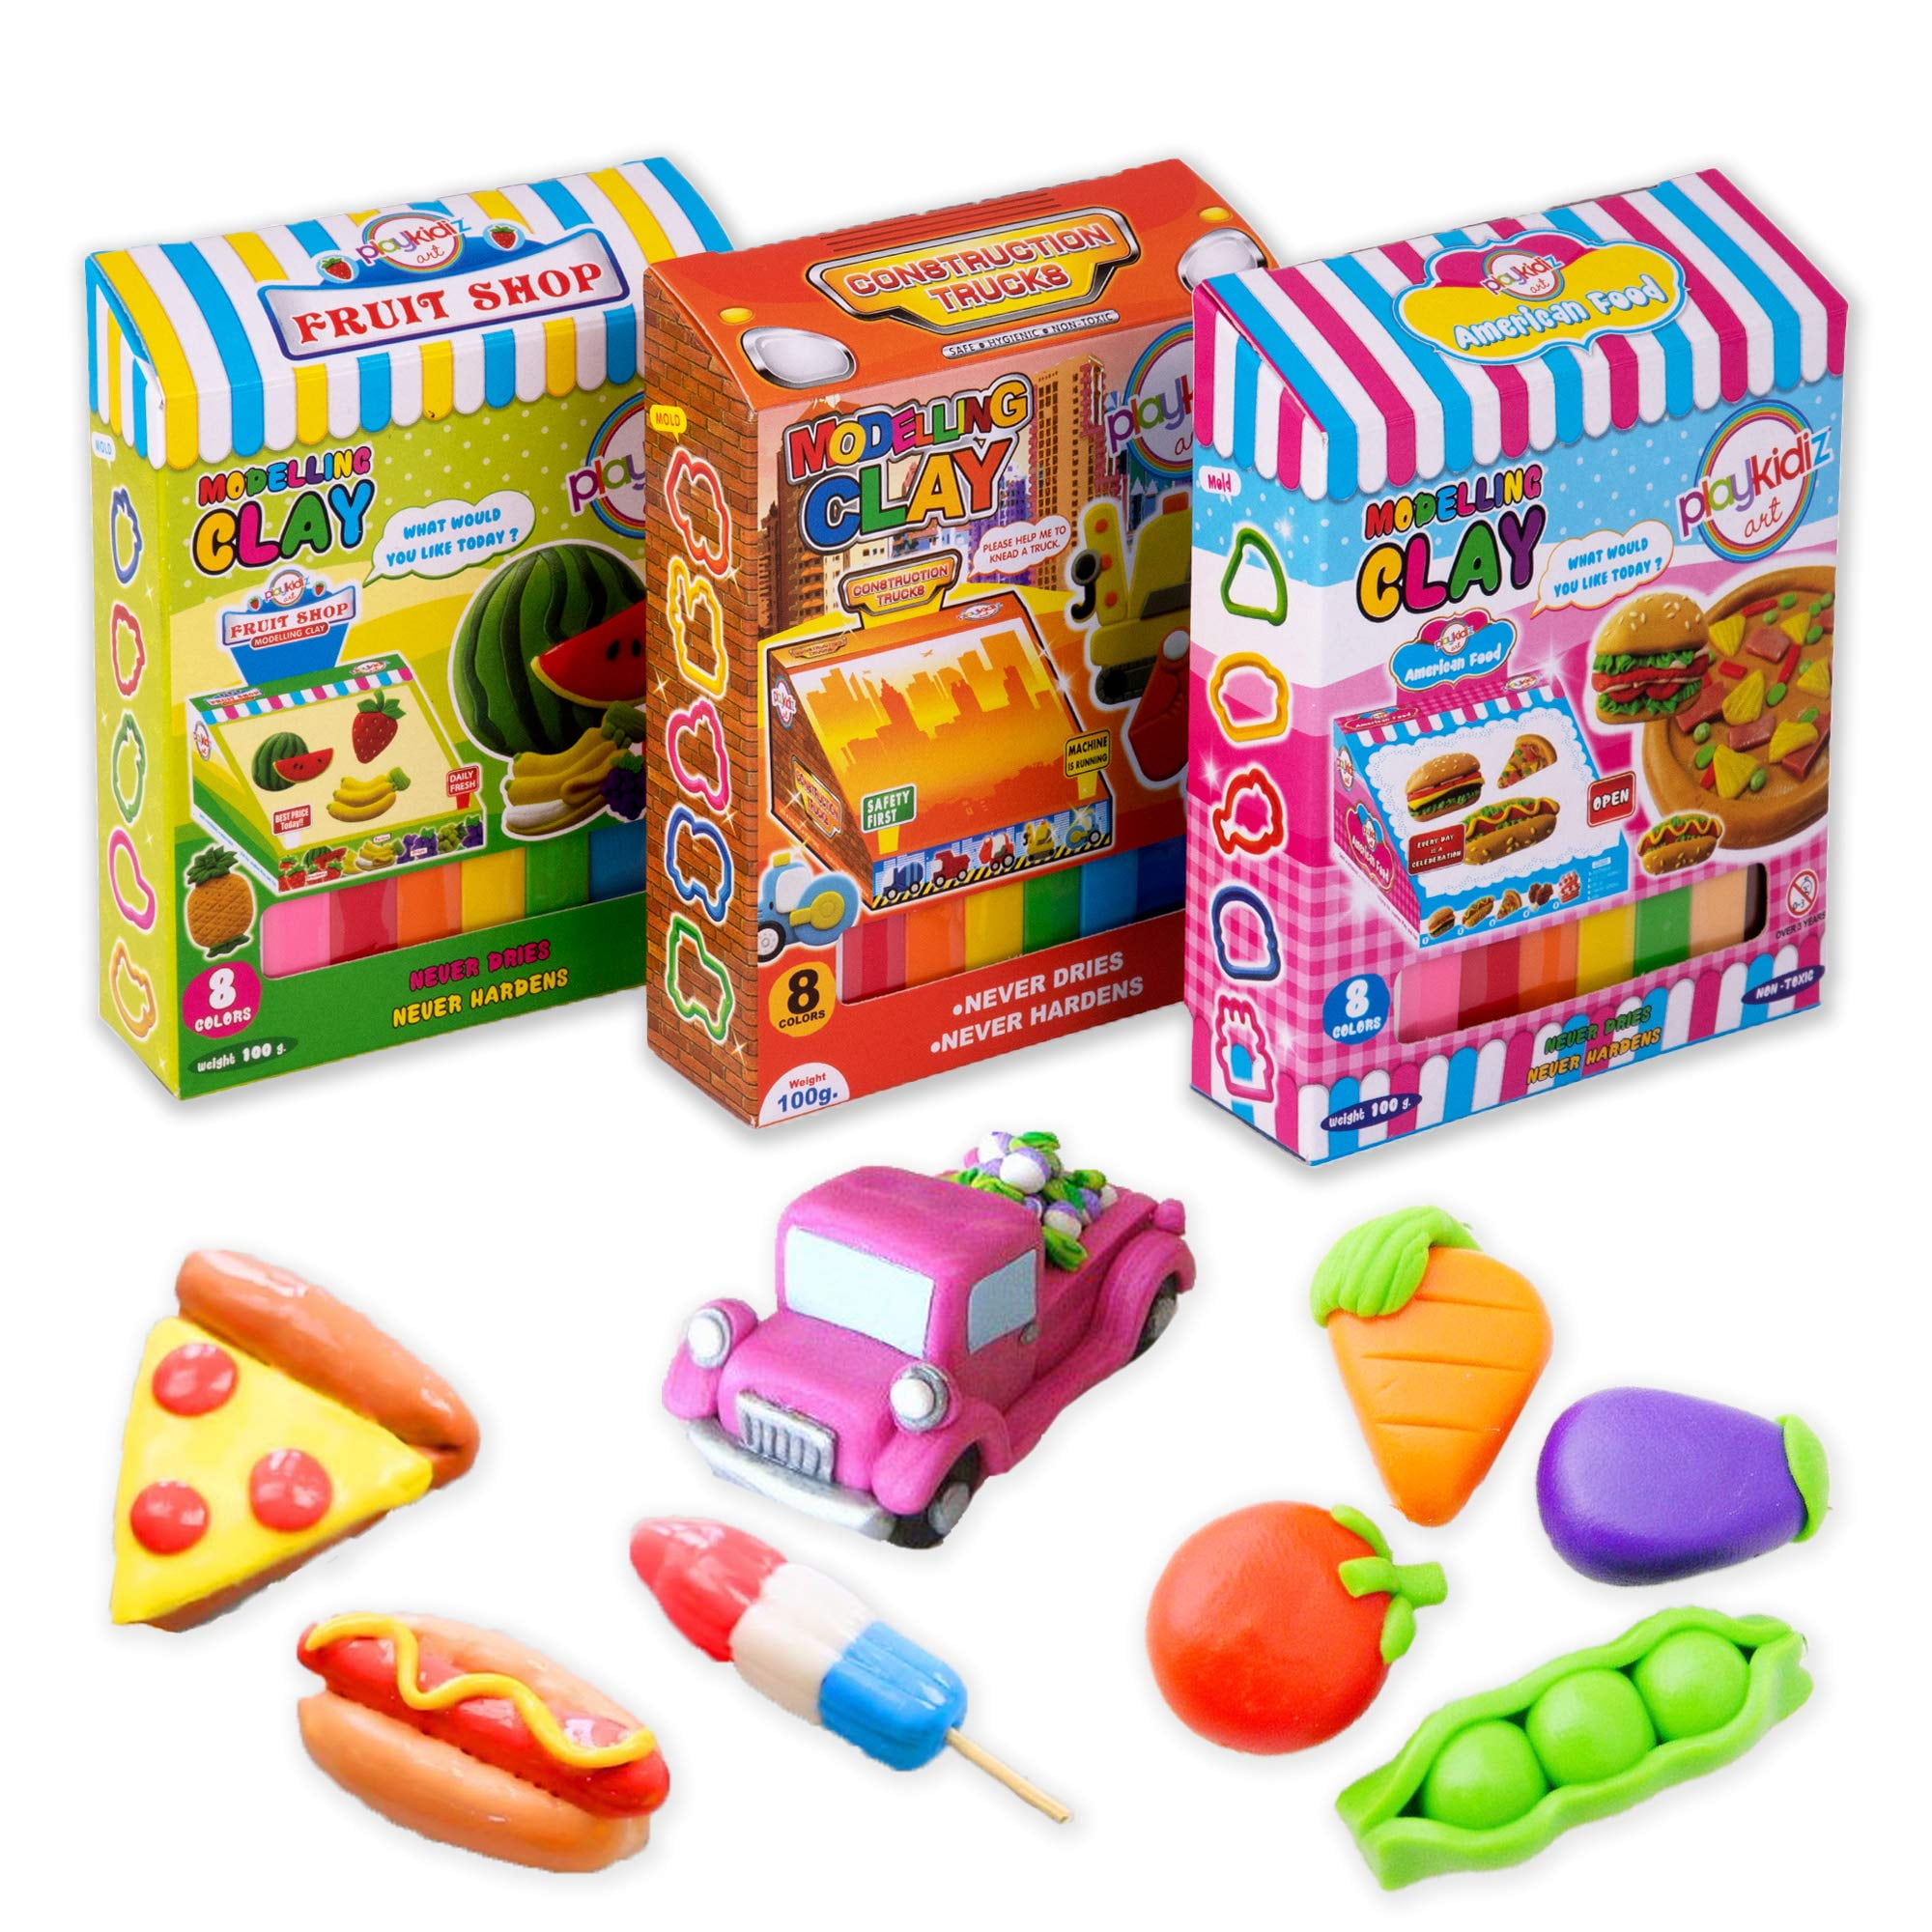 2 Play Dough Doh Set House Modelling Clay Hand Mould Kids Fun Learning Craft Toy 